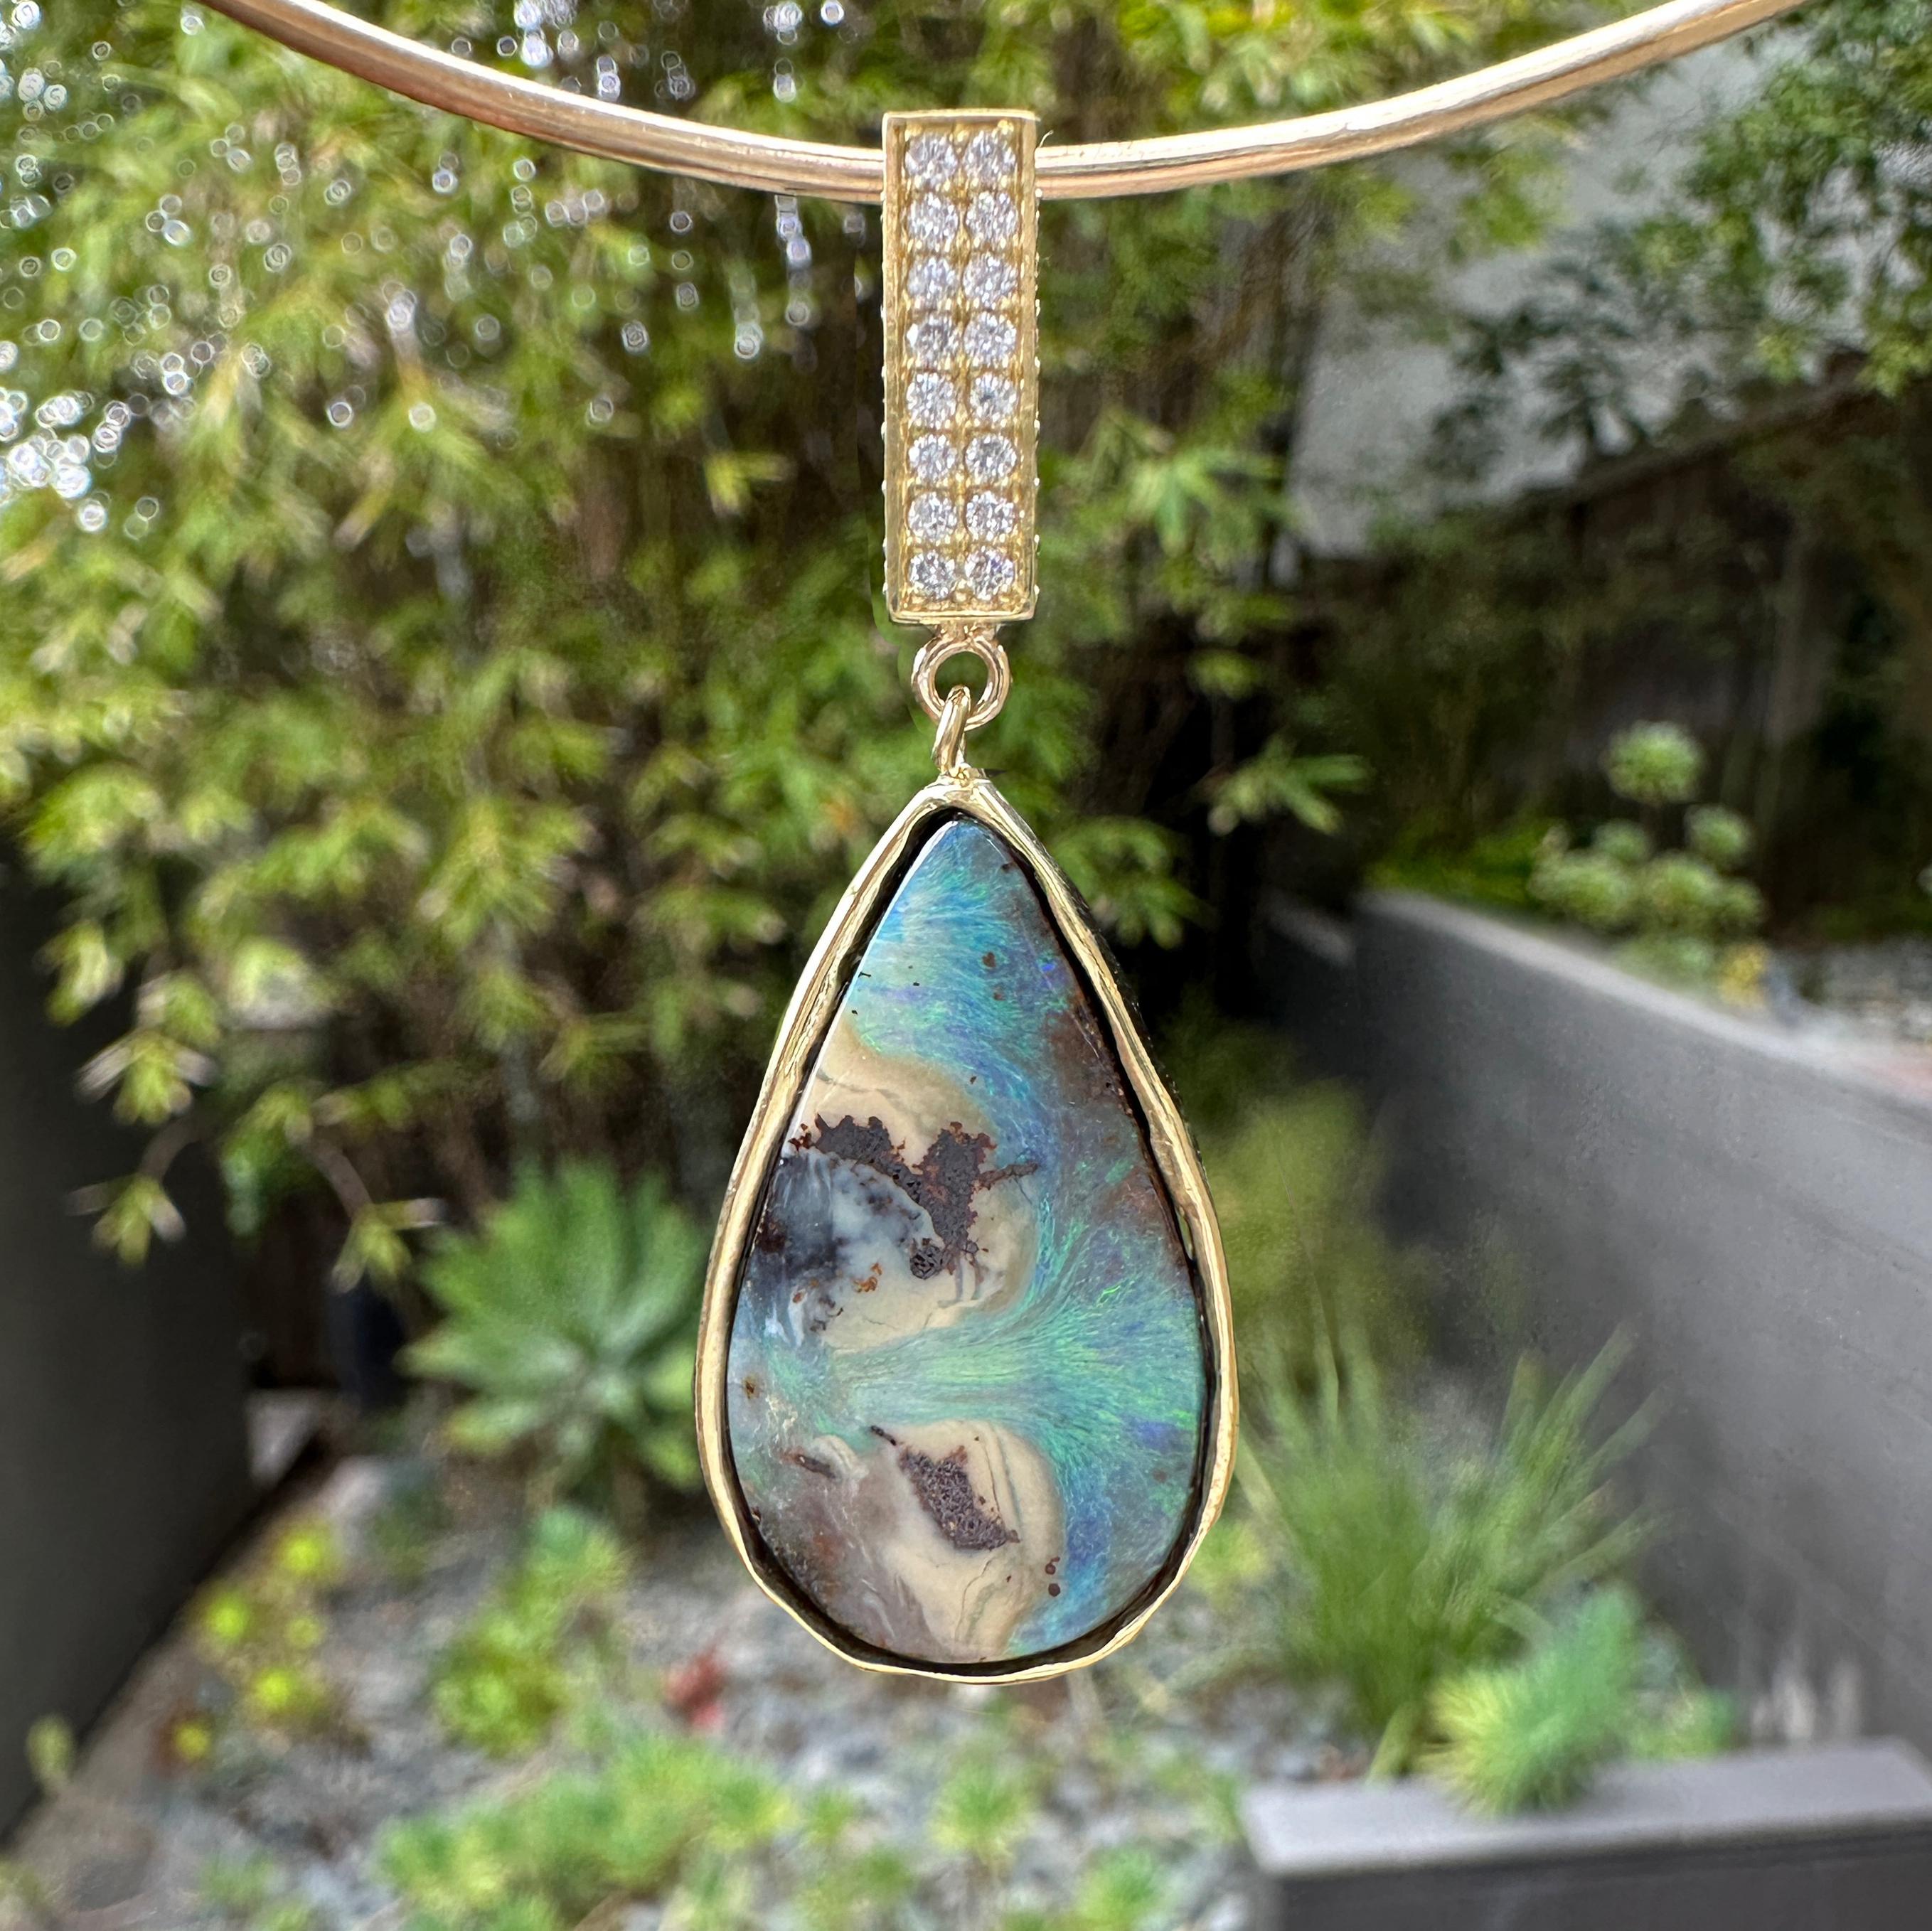 This one-of-a-kind choker features a great new bale design by Eytan Brandes.  Here, his box bale shares the stage with a knockout boulder opal from Broken River Mining in Australia.

The 18 karat gold bale is pavé-set on three sides with forty-four